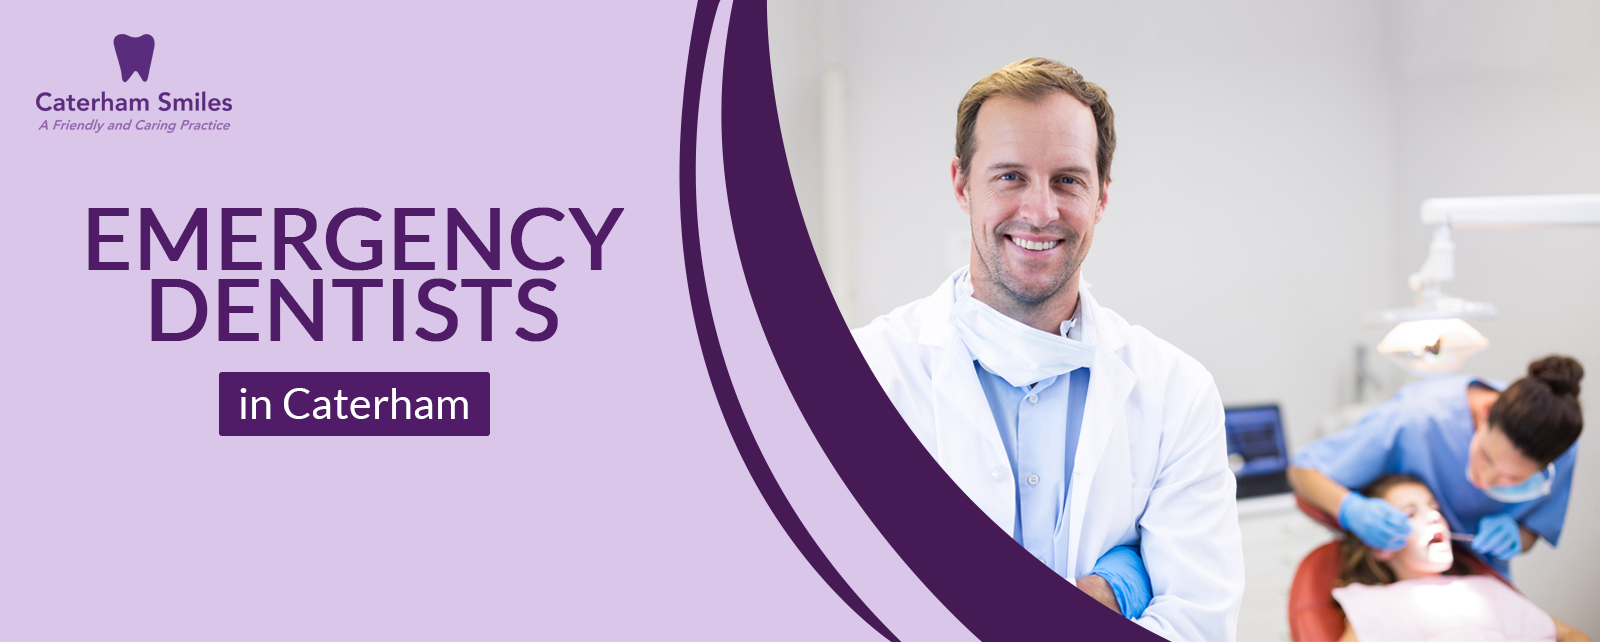 Emergengy Dentists in Caterham